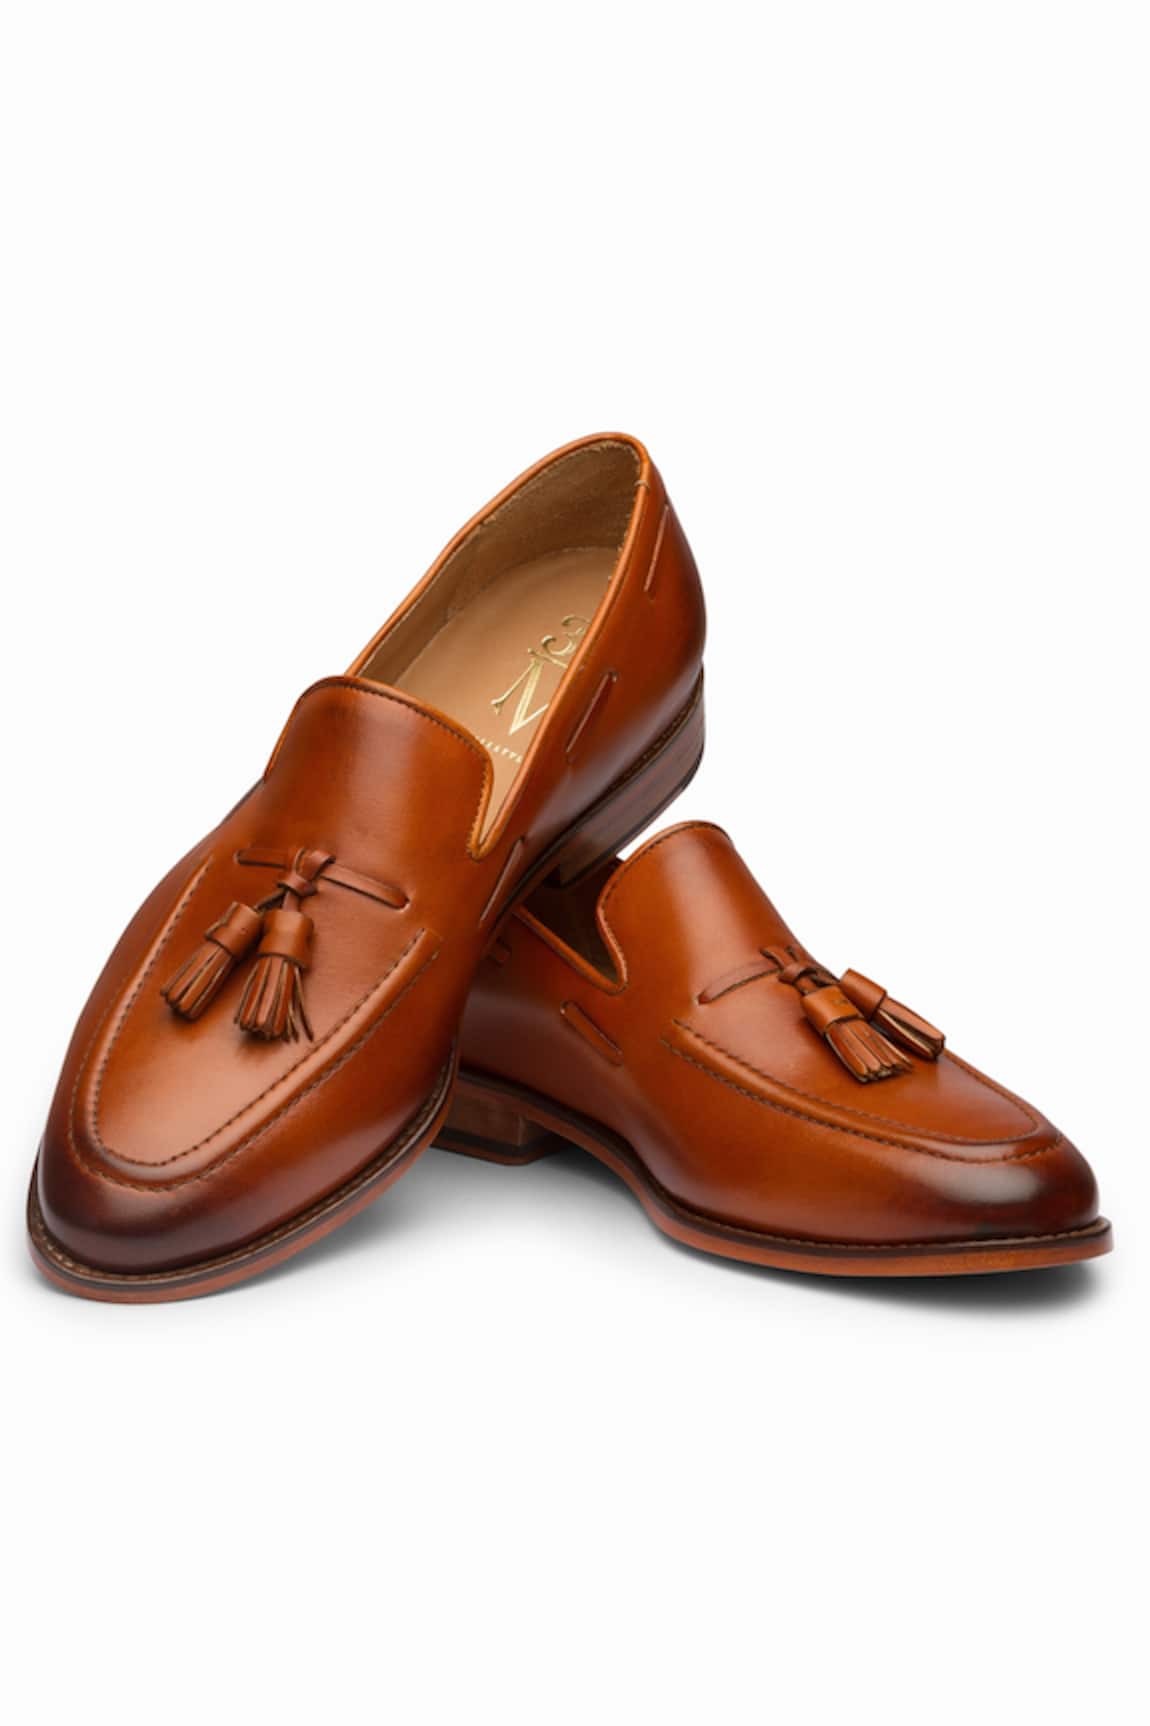 dapper Shoes Handcrafted Leather Tassel Loafers